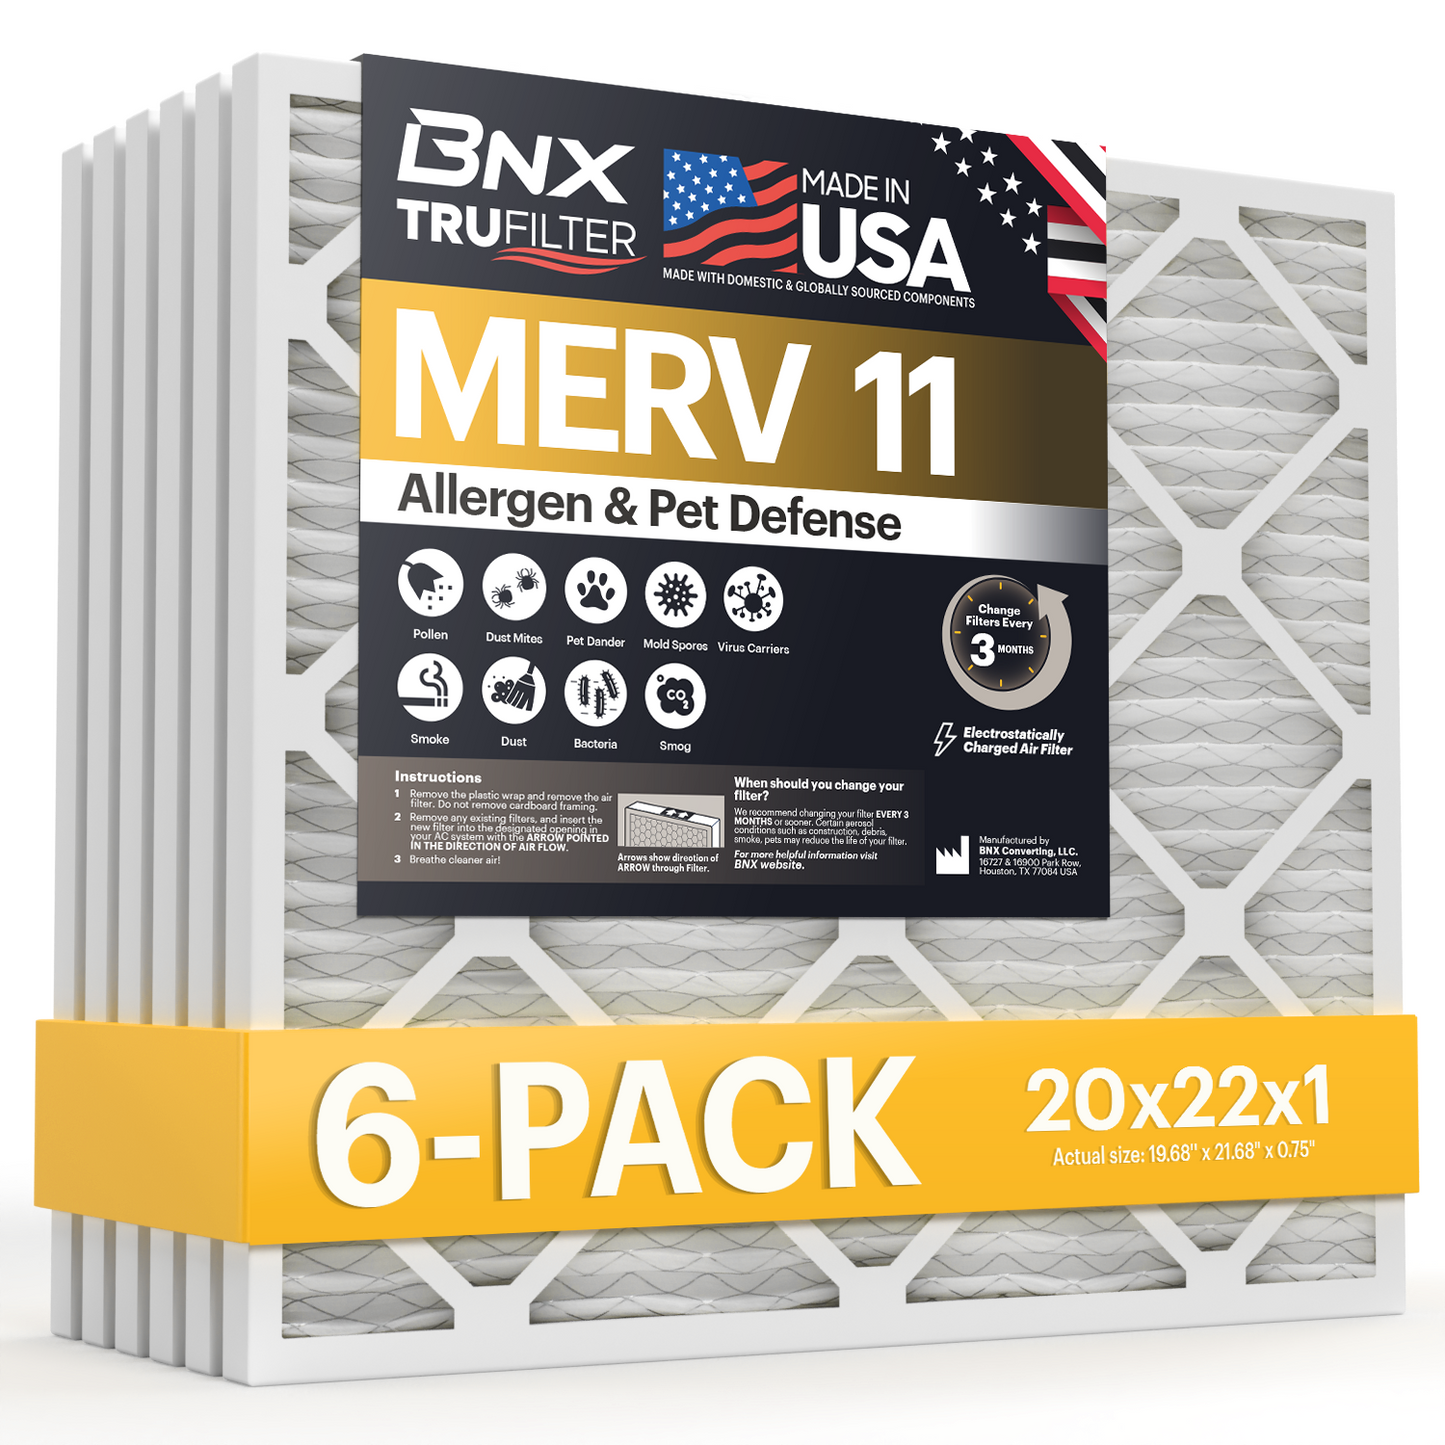 BNX TruFilter 20x22x1 Air Filter MERV 11 (6-Pack) - MADE IN USA - Allergen Defense Electrostatic Pleated Air Conditioner HVAC AC Furnace Filters for Allergies, Dust, Pet, Smoke, Allergy MPR 1200 FPR 7